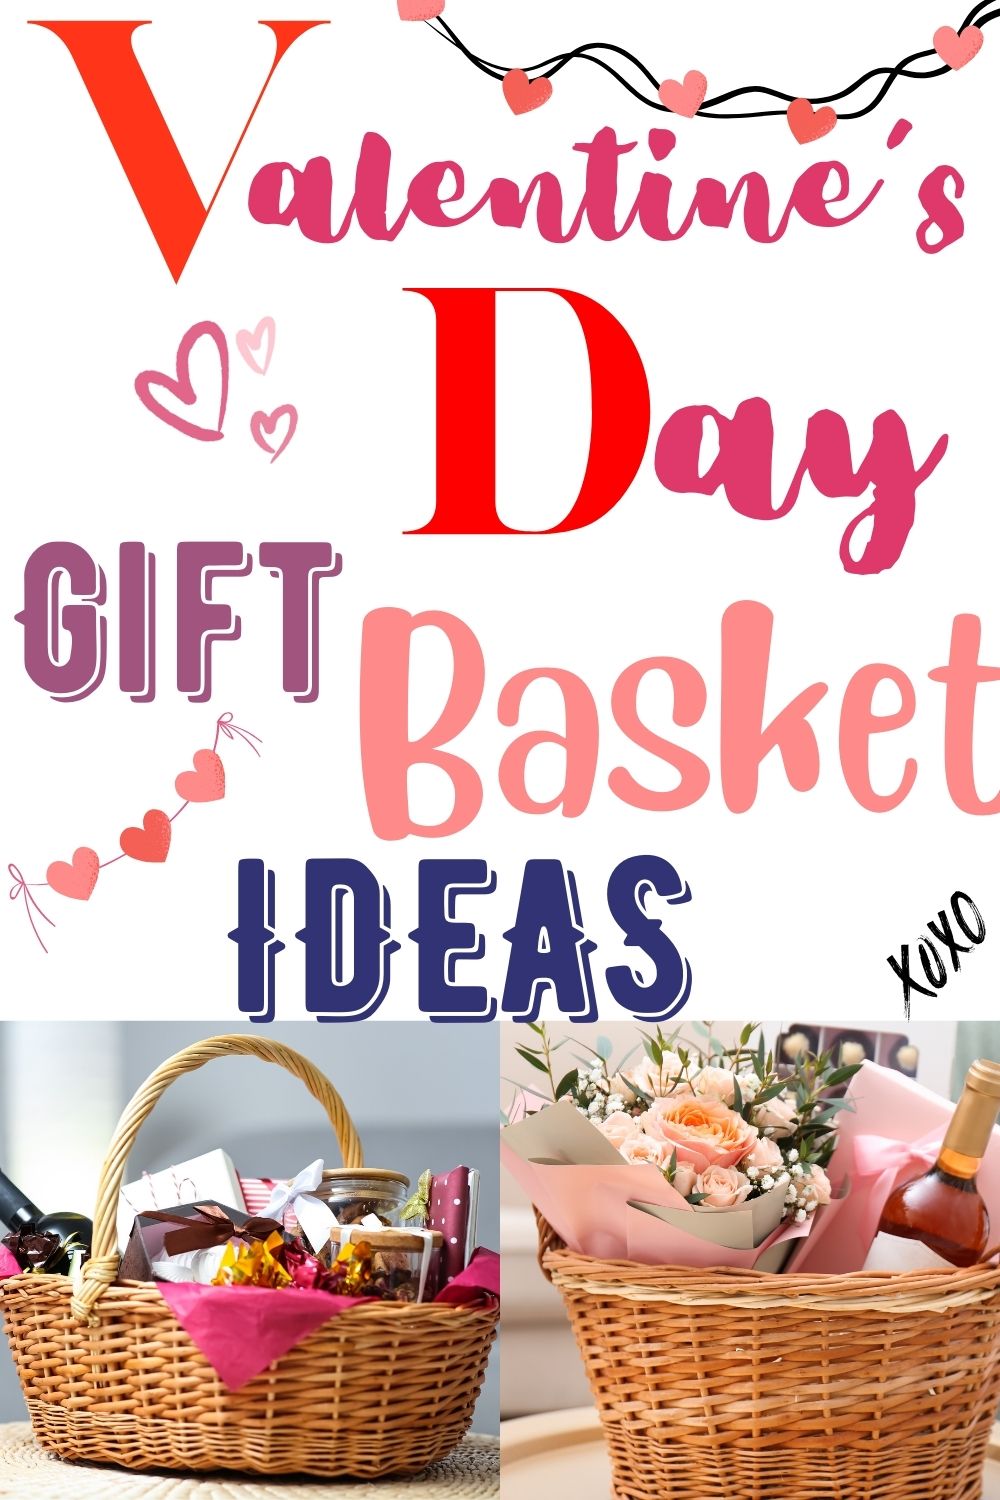 25 DIY Valentine's Day Gifts That Show Him How Much You Care - DIY & Crafts